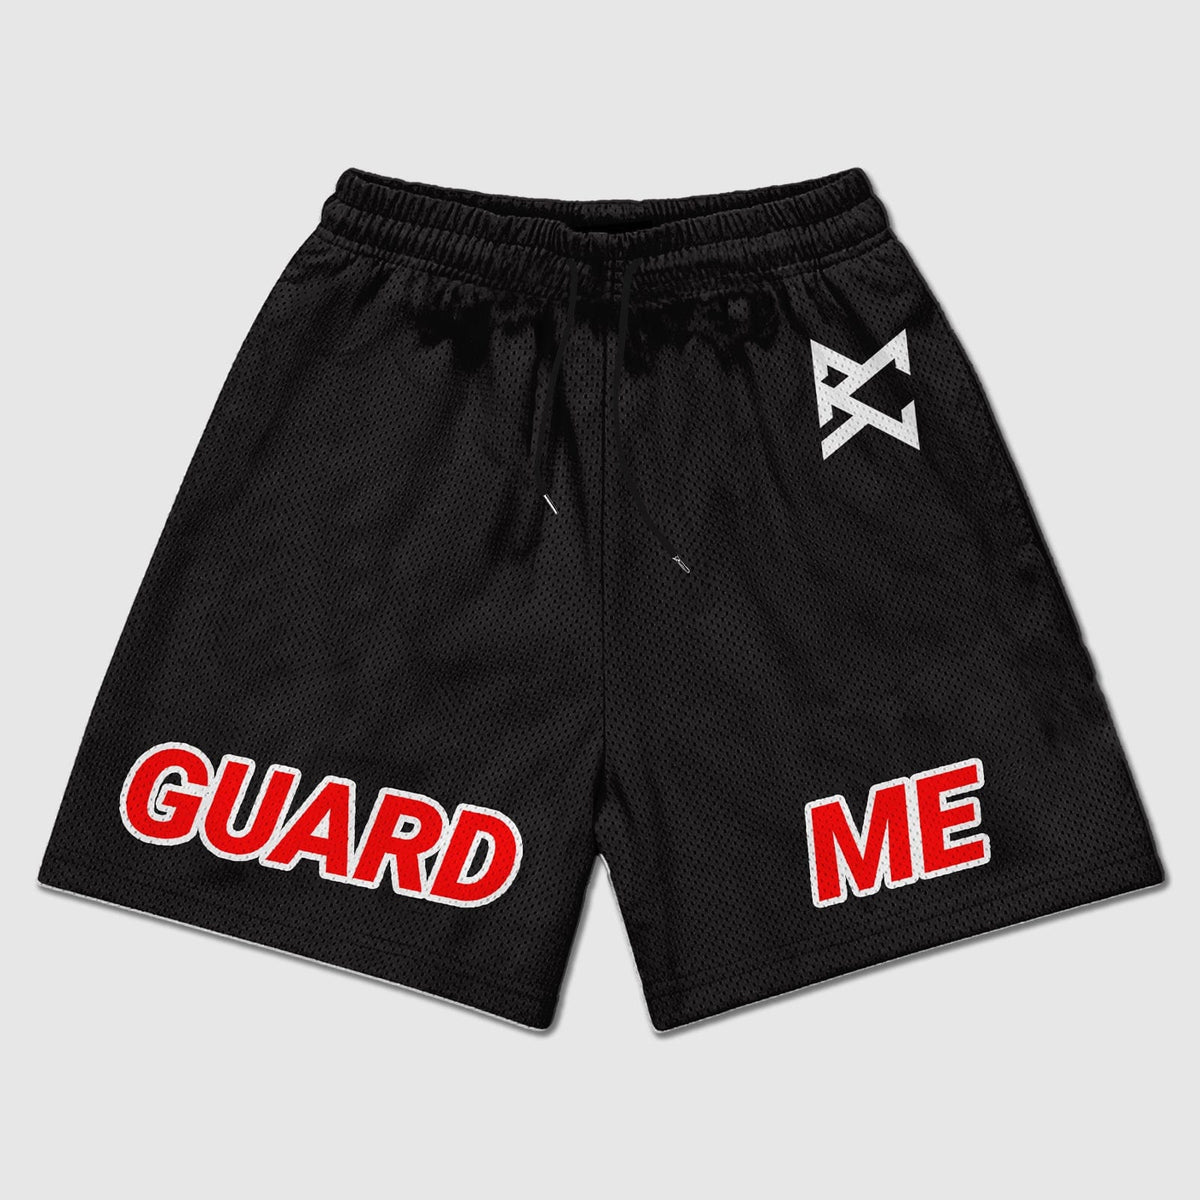 You Can't Guard Me Shorts